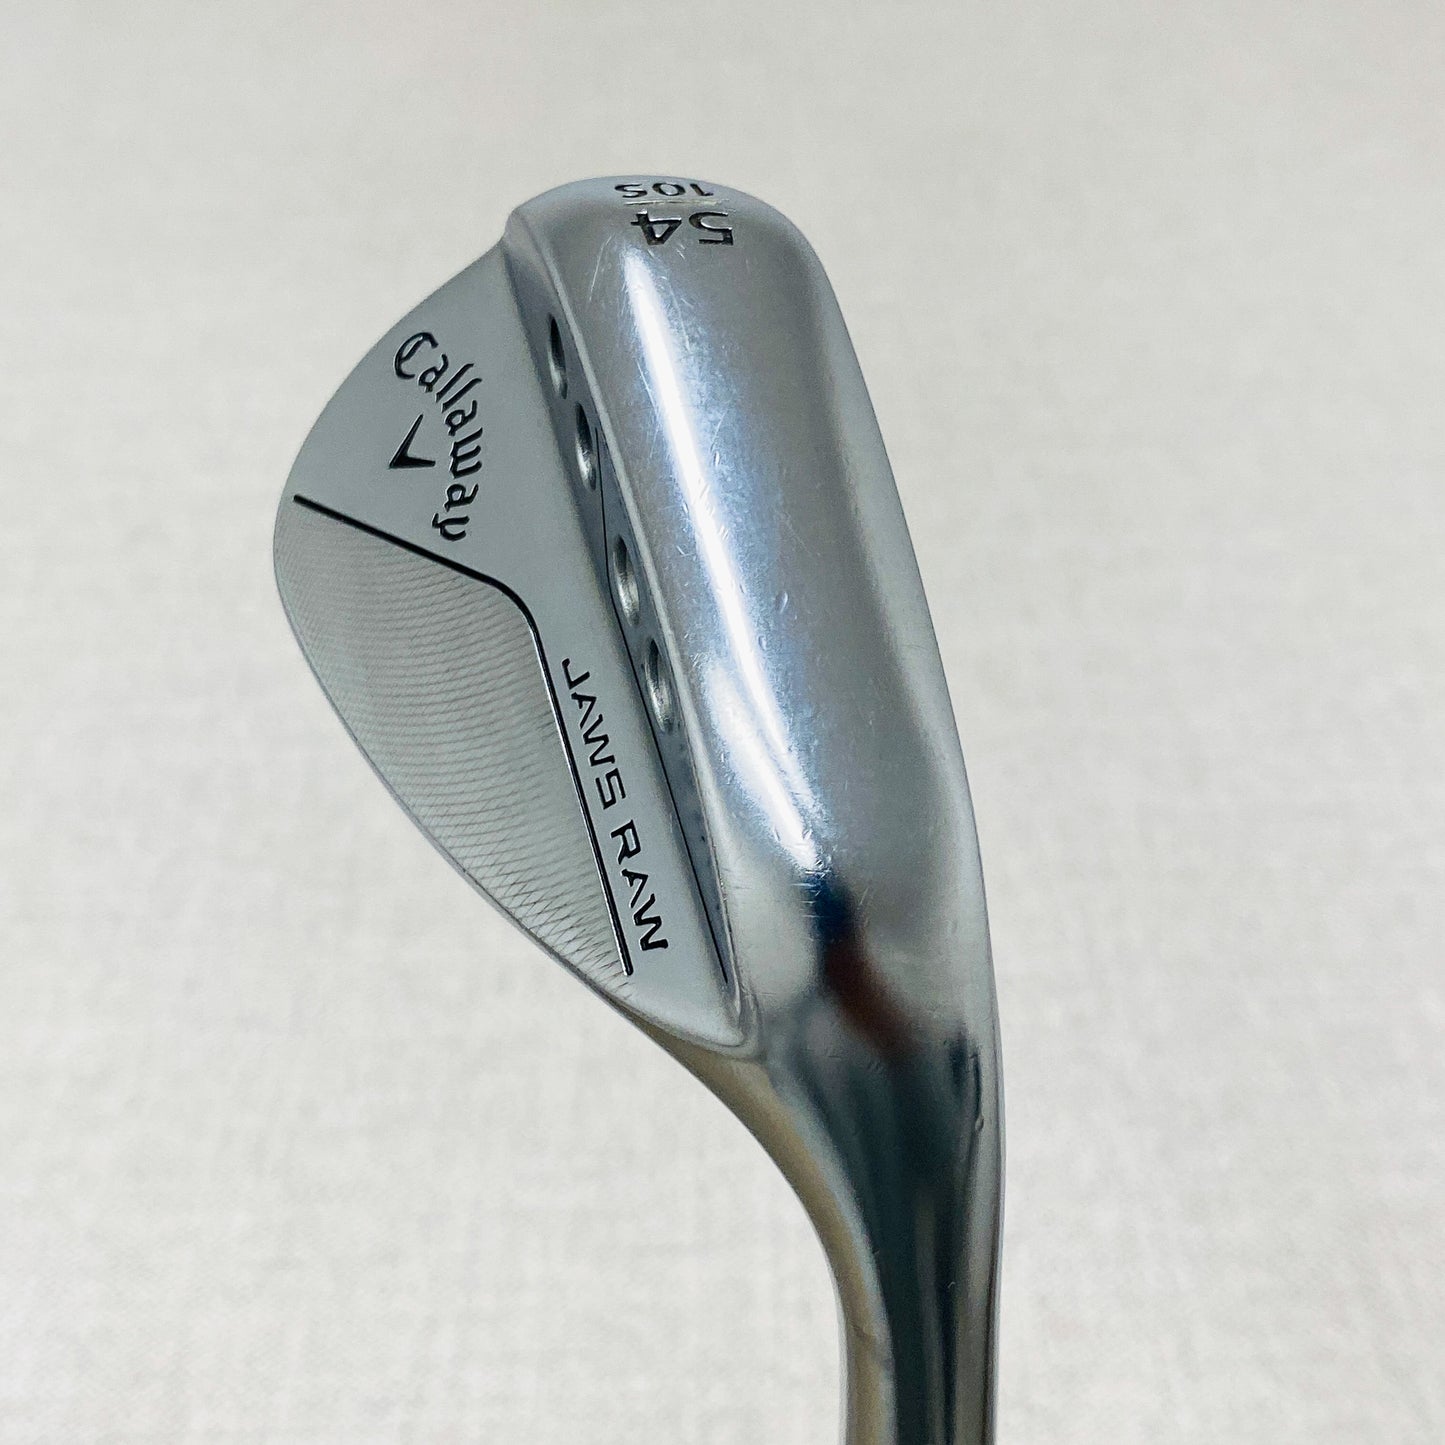 Callaway JAWS Raw-Face Wedge Set (54.10S, 60.10S) Dynamic Gold Spinner 115 Steel - Excellent Condition # 14089